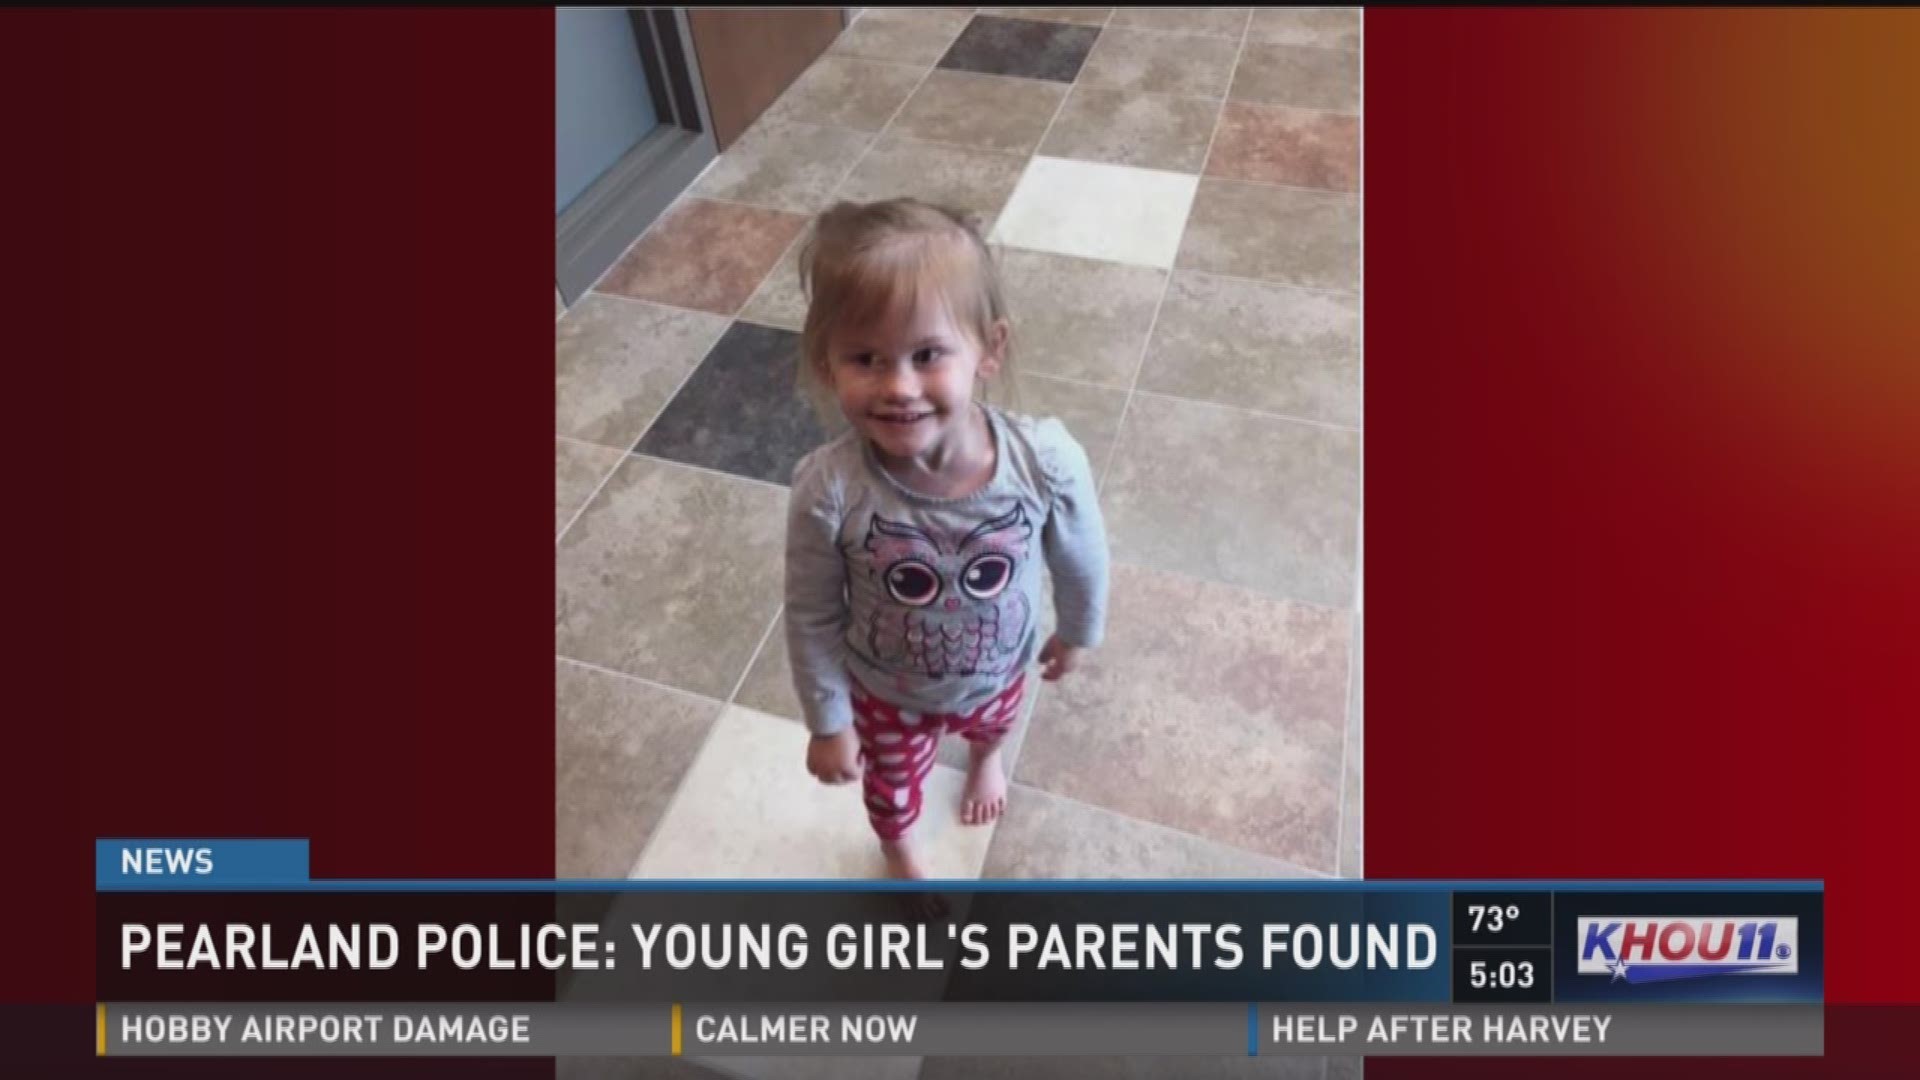 Pearland Police have located the parents of a toddler found wandering alone Wednesday.